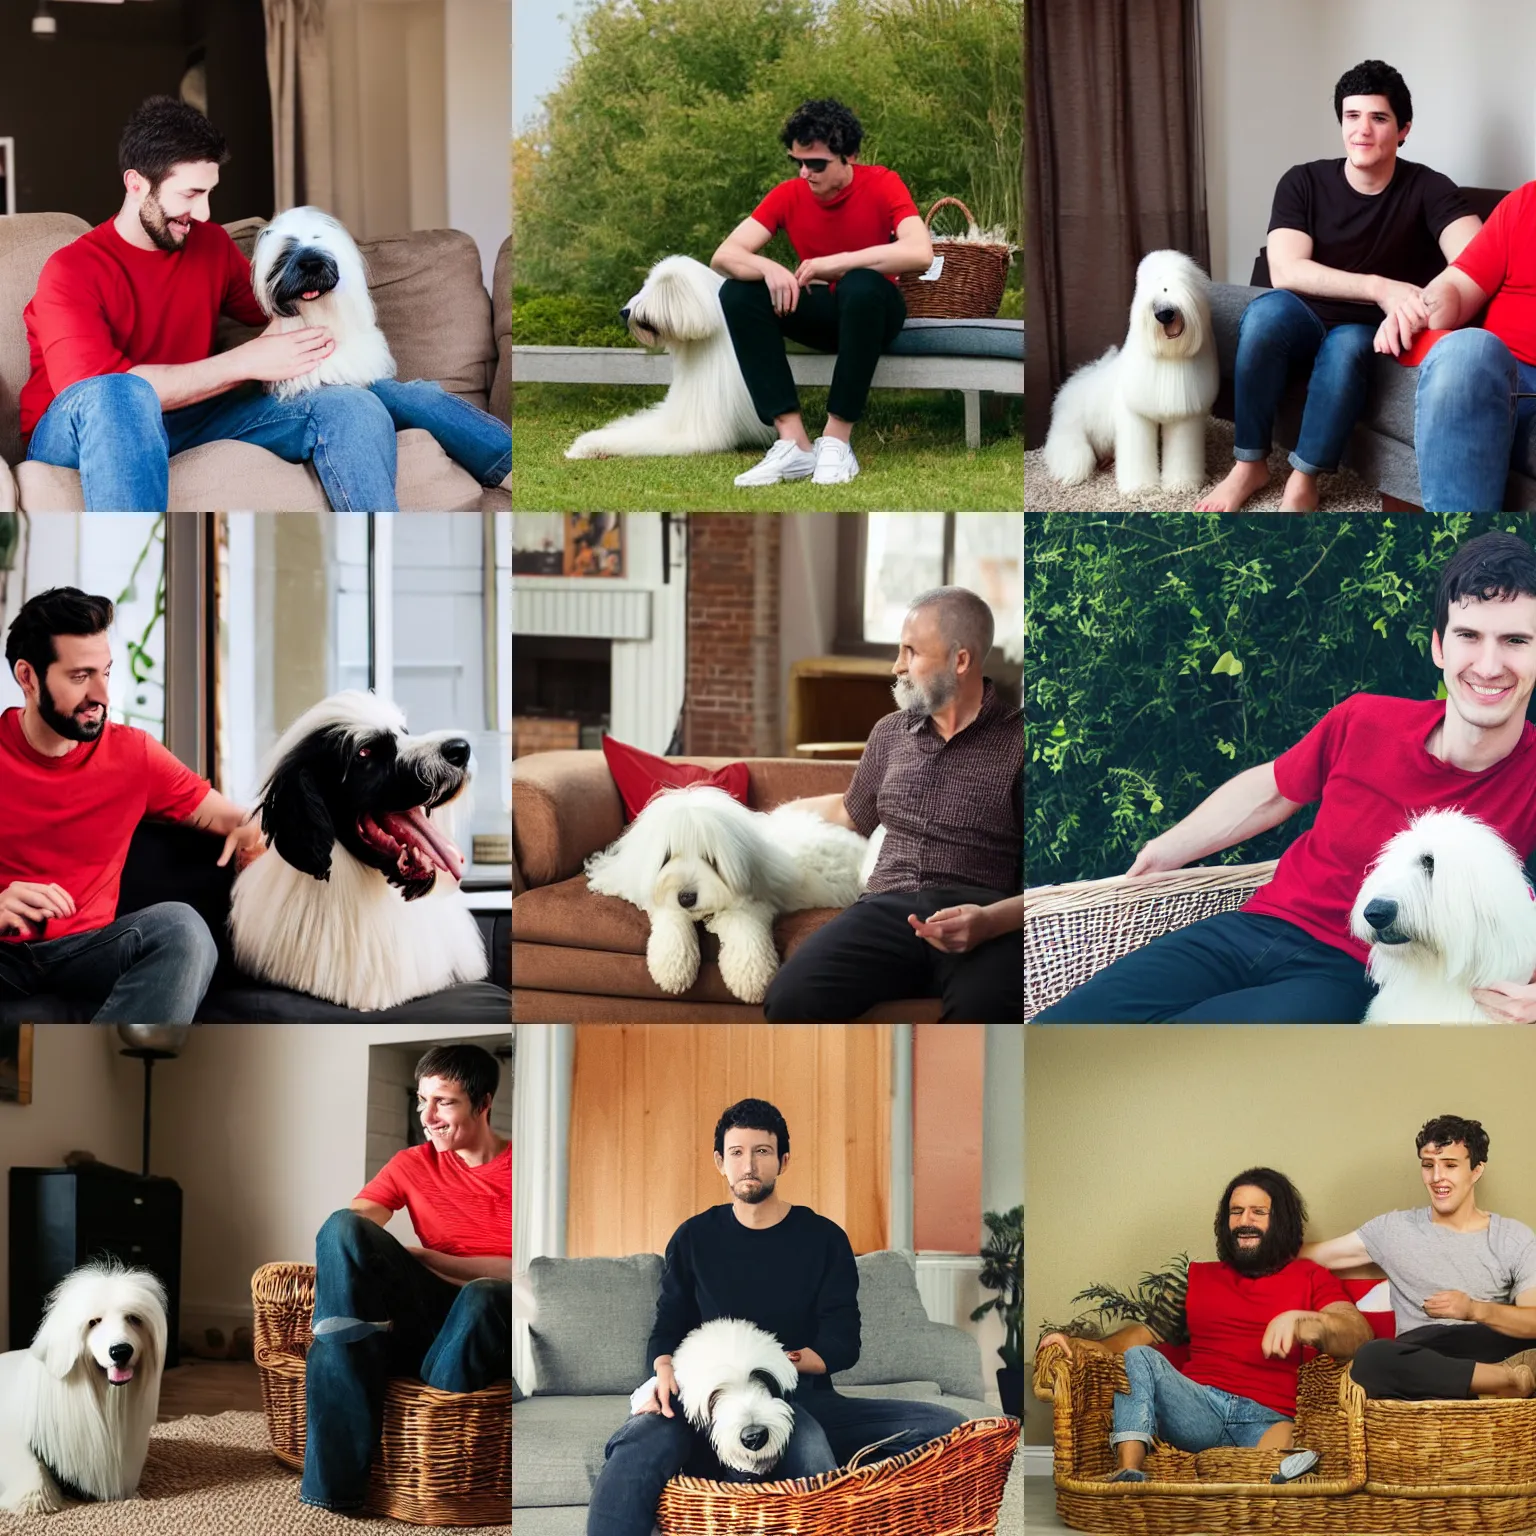 Prompt: A 30 year old skinny man with short black hair and a red shirt sits on a couch with next to him an old English sheepdog in a basket